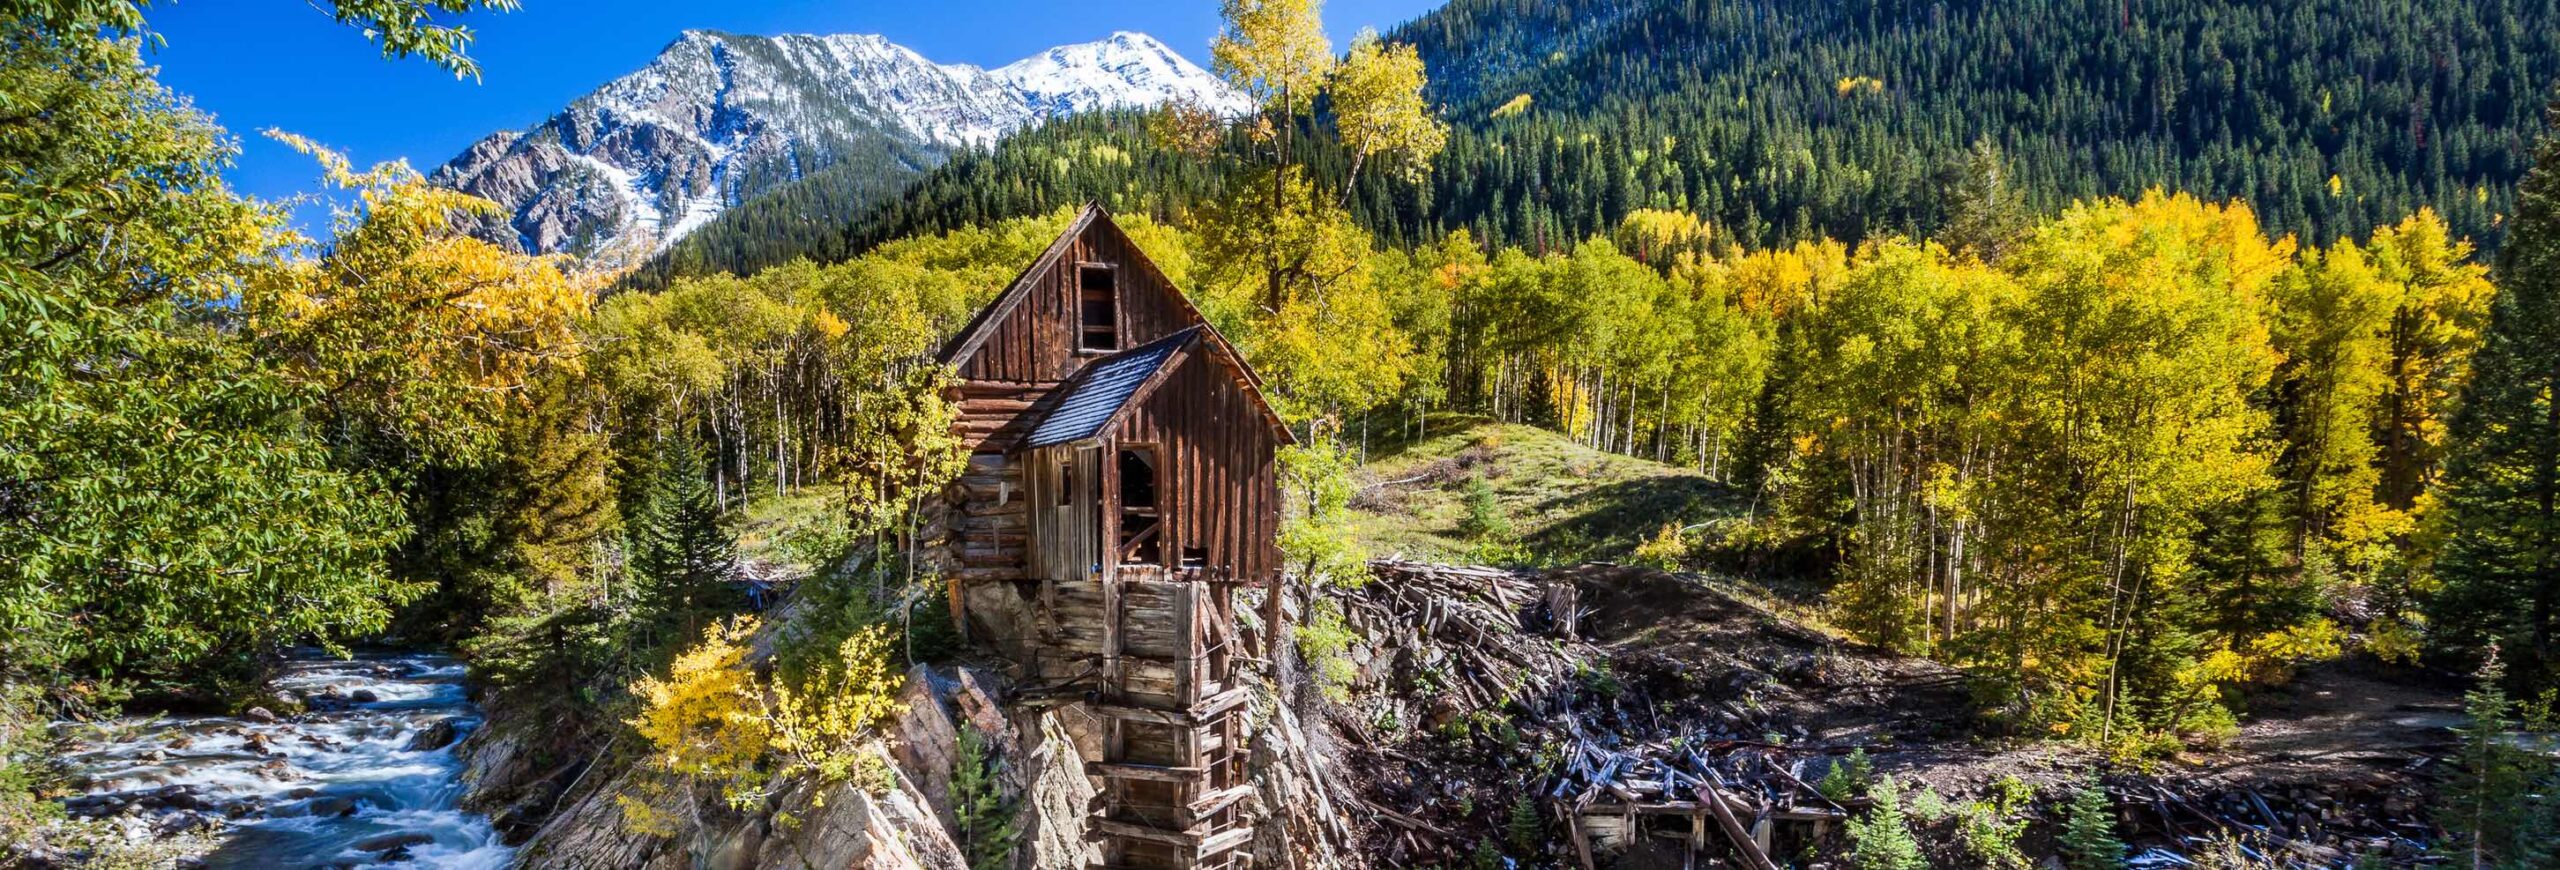 Capturing the timeless beauty of the old wooden Crystal Mill, this photo is framed by a lush forest with the tranquil Crystal River flowing beneath. Majestic mountains grace the distant horizon.